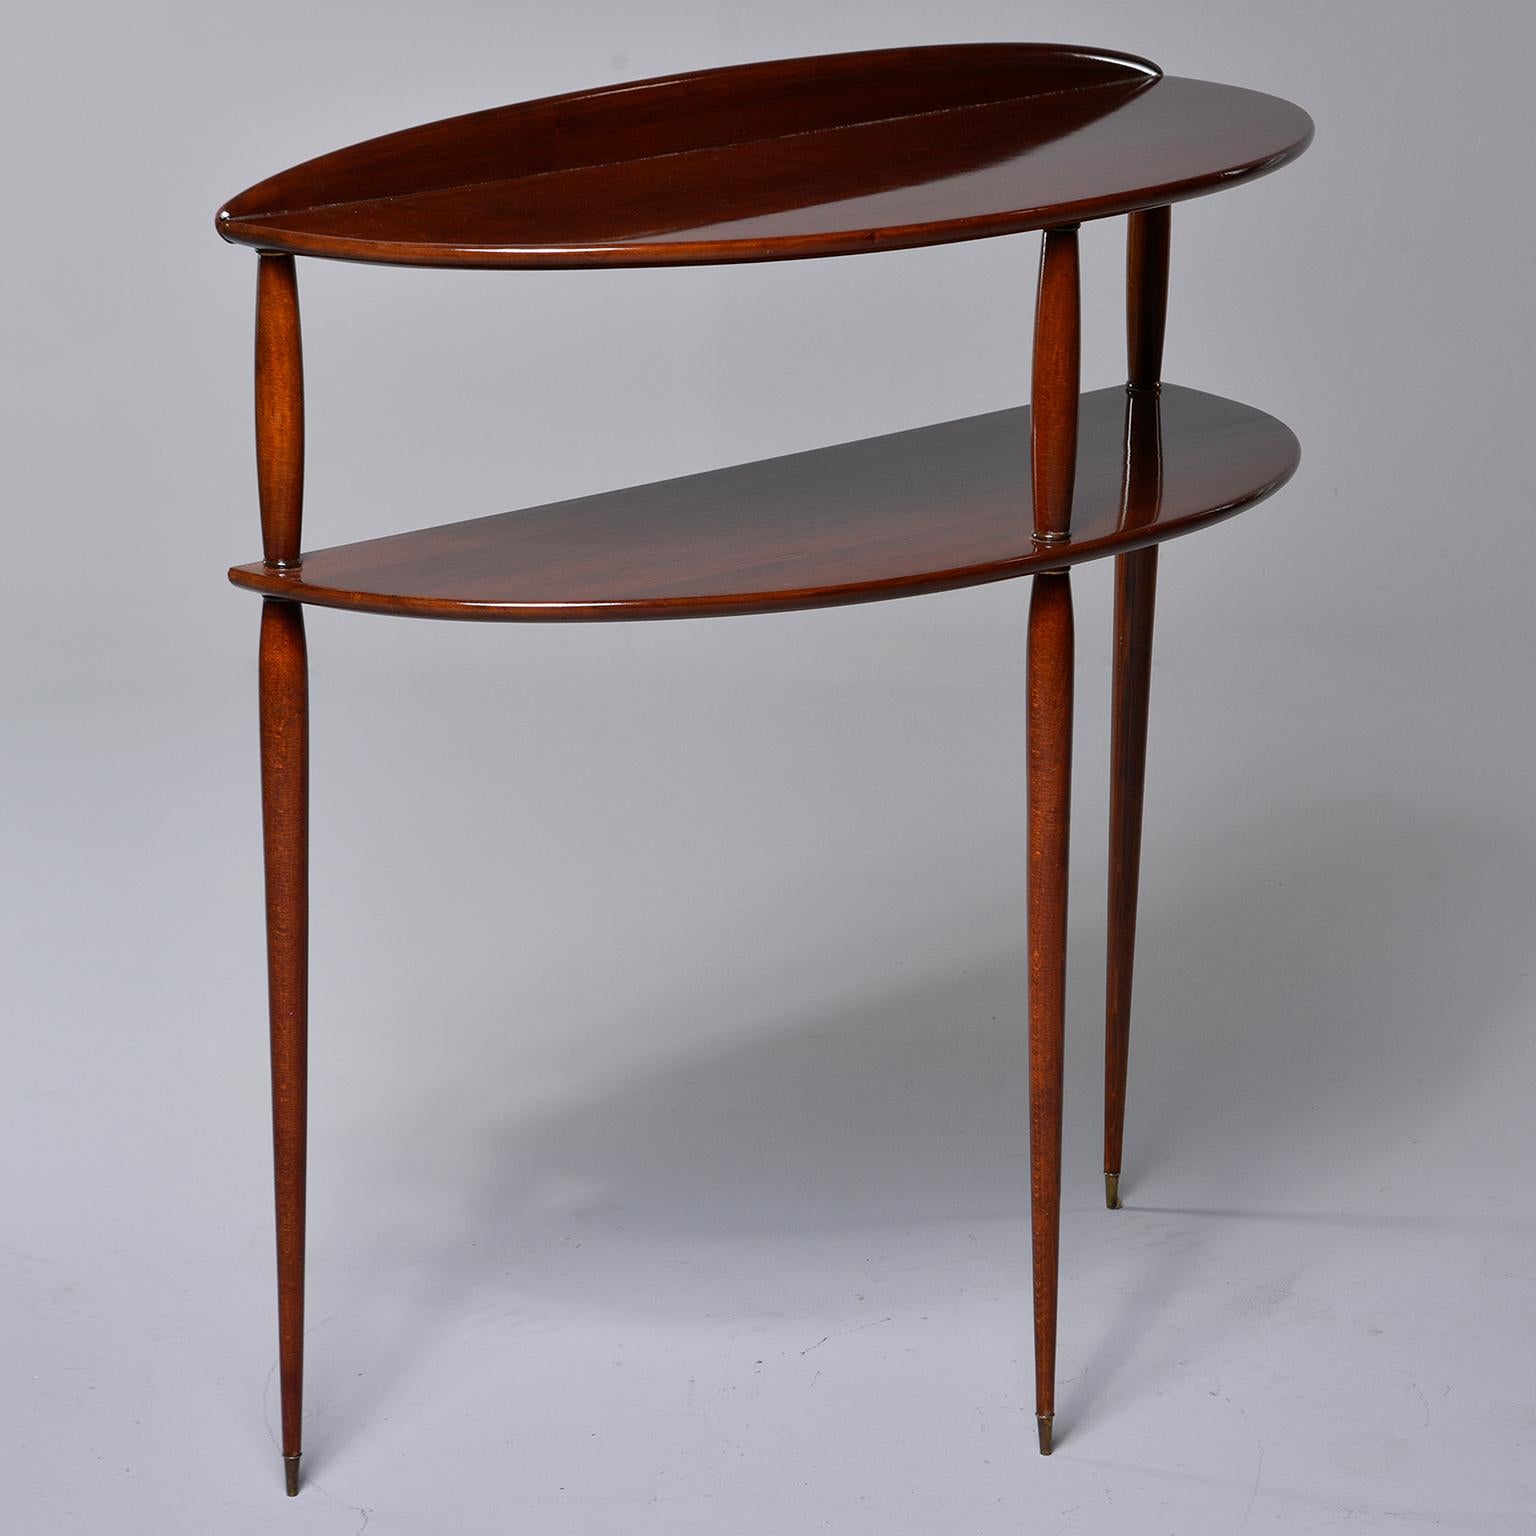 Two-tier palisander console features a demilune shaped tabletop and lower shelf and slender, tapered legs with brass-capped feet, circa 1960. Found in Italy, unknown maker.